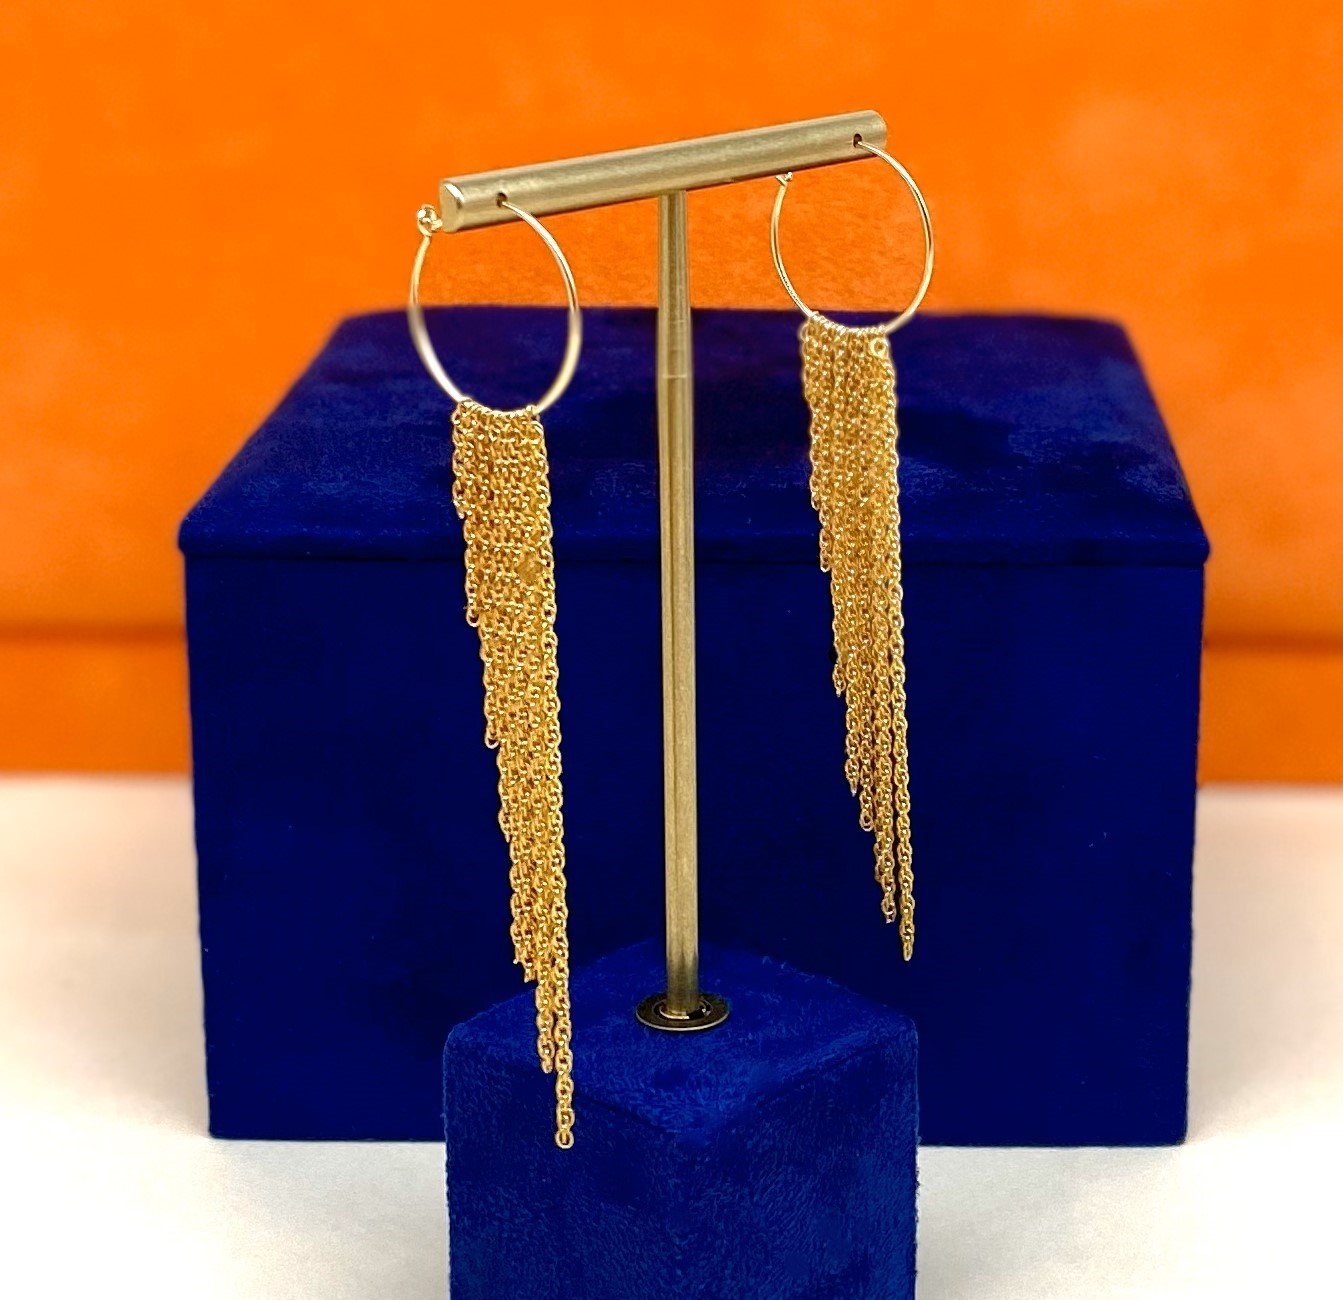  Title: Fringe earrings - gold Medium: Gold plated rope chain on gold filled hoops Price: £95 